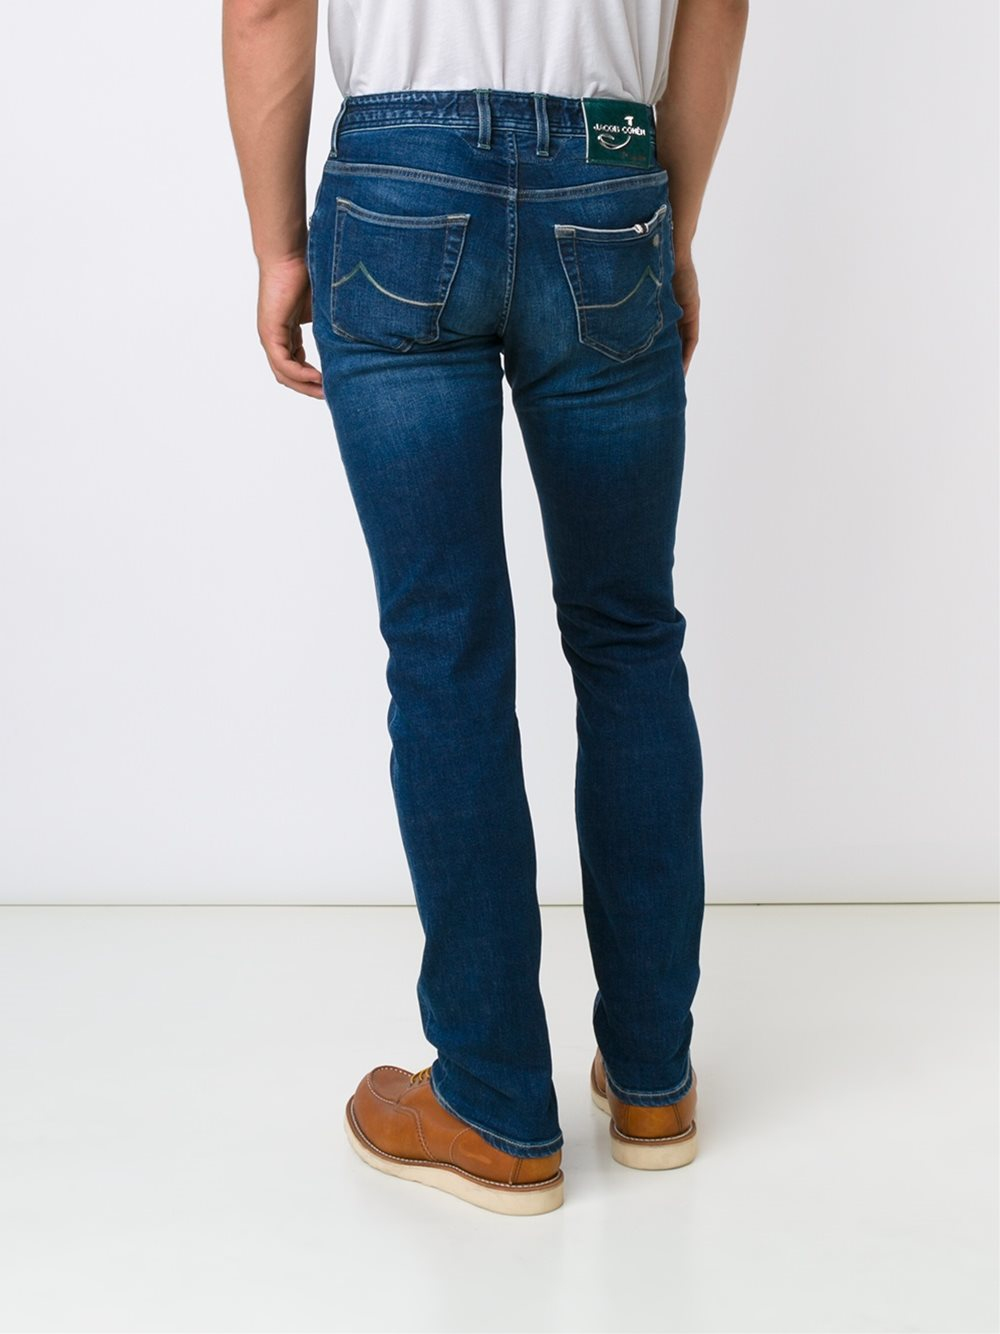 Lyst - Jacob Cohen 'limited Edition' Washed Jeans in Blue for Men